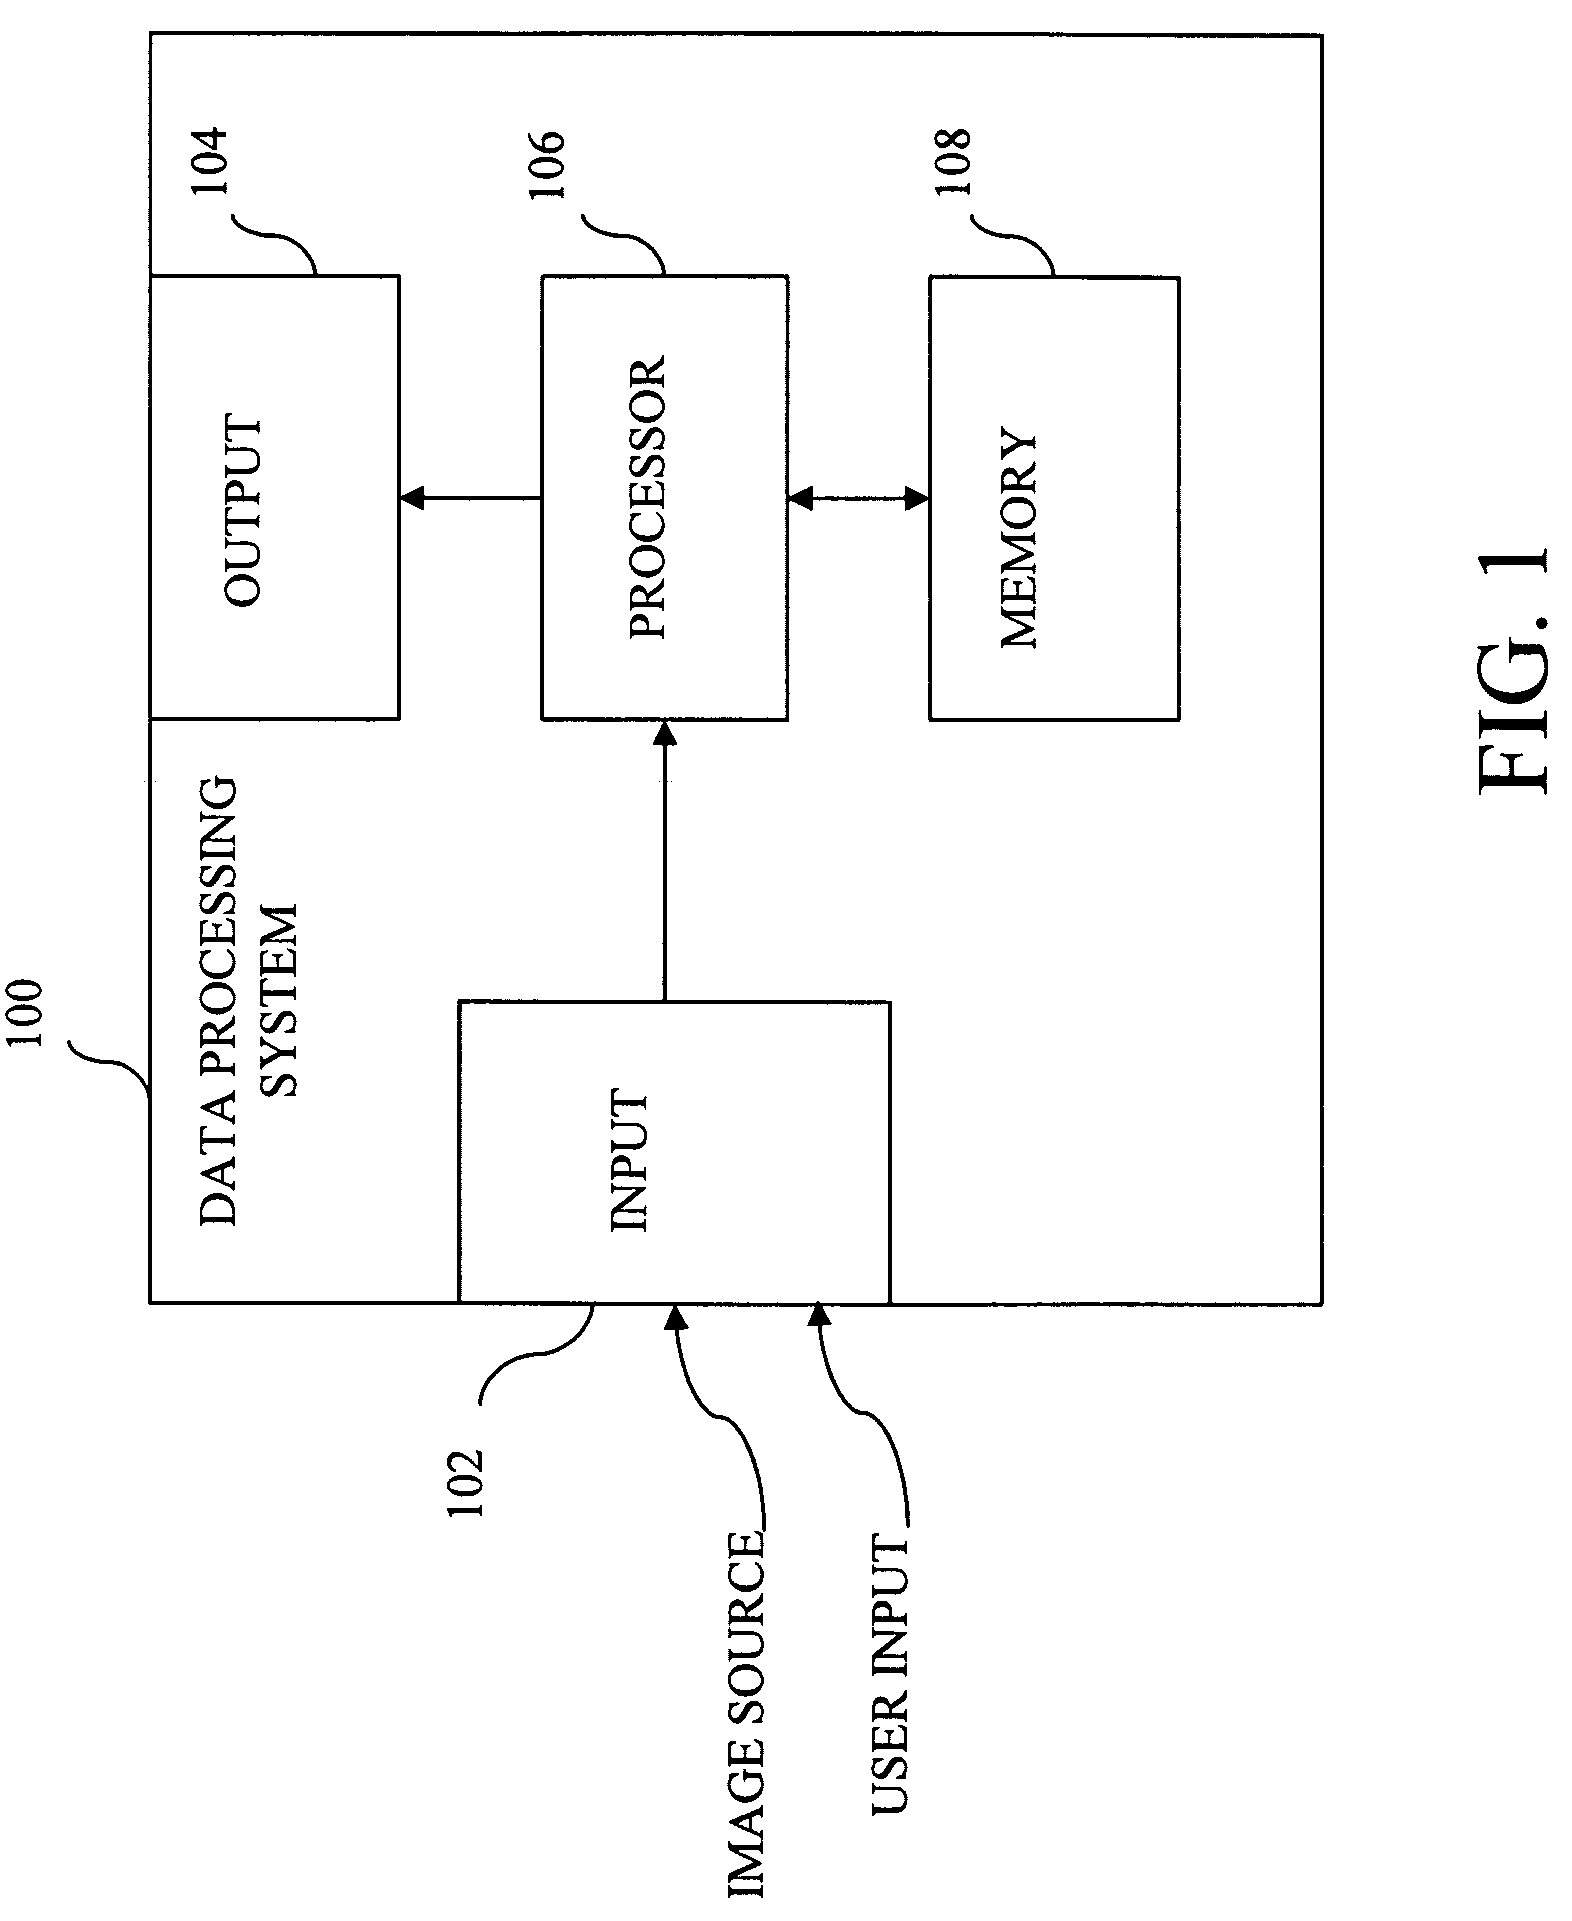 Method and apparatus for the surveillance of objects in images